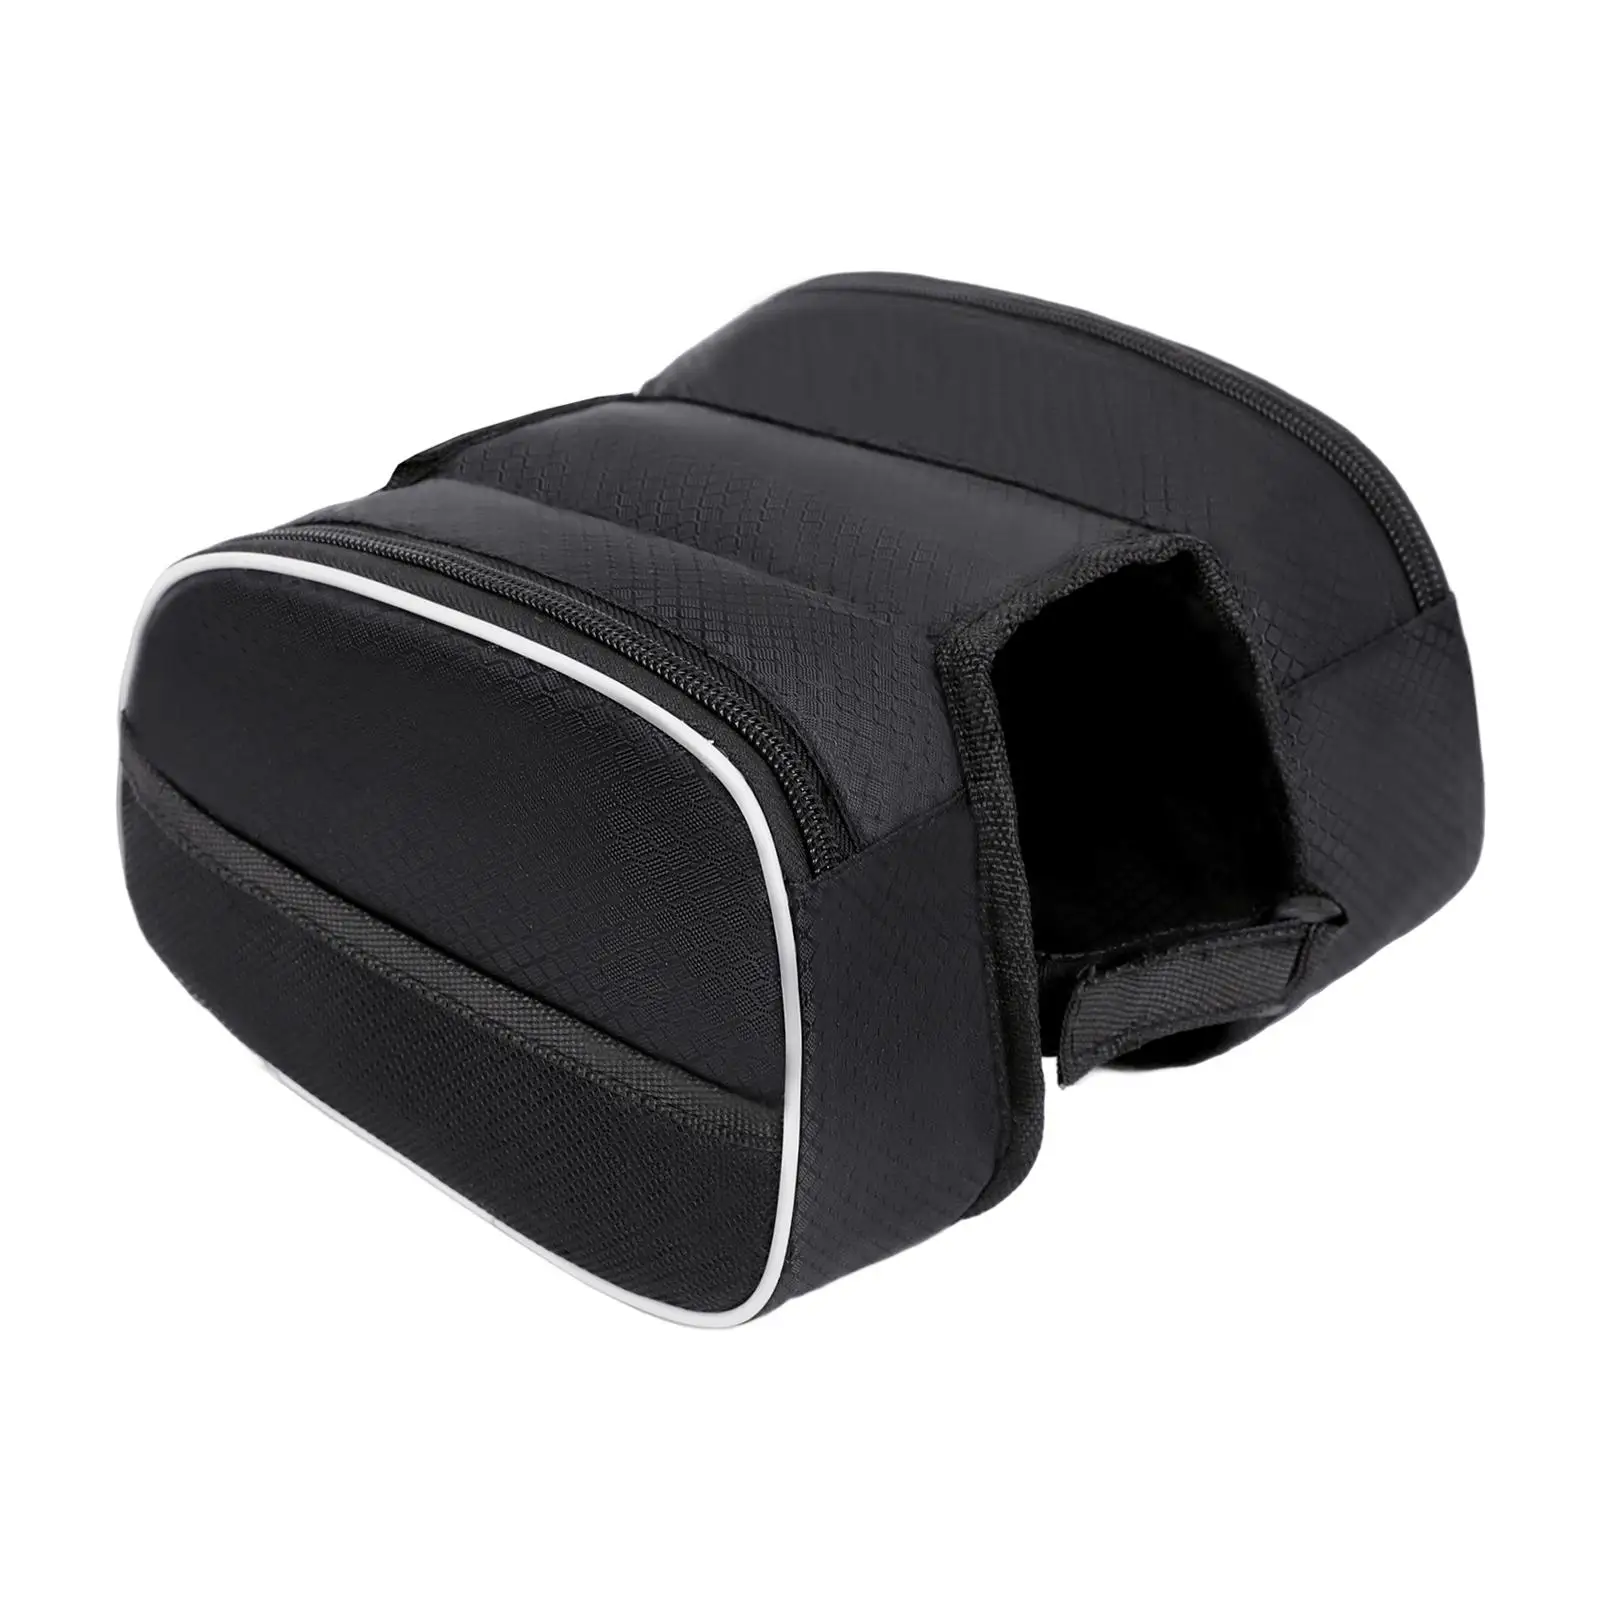 Bicycle Front Frame Bag Pouch Phone Case Holder Luggage Organizer Commuting Bag Panniers Bag Double Side Bikes Bag